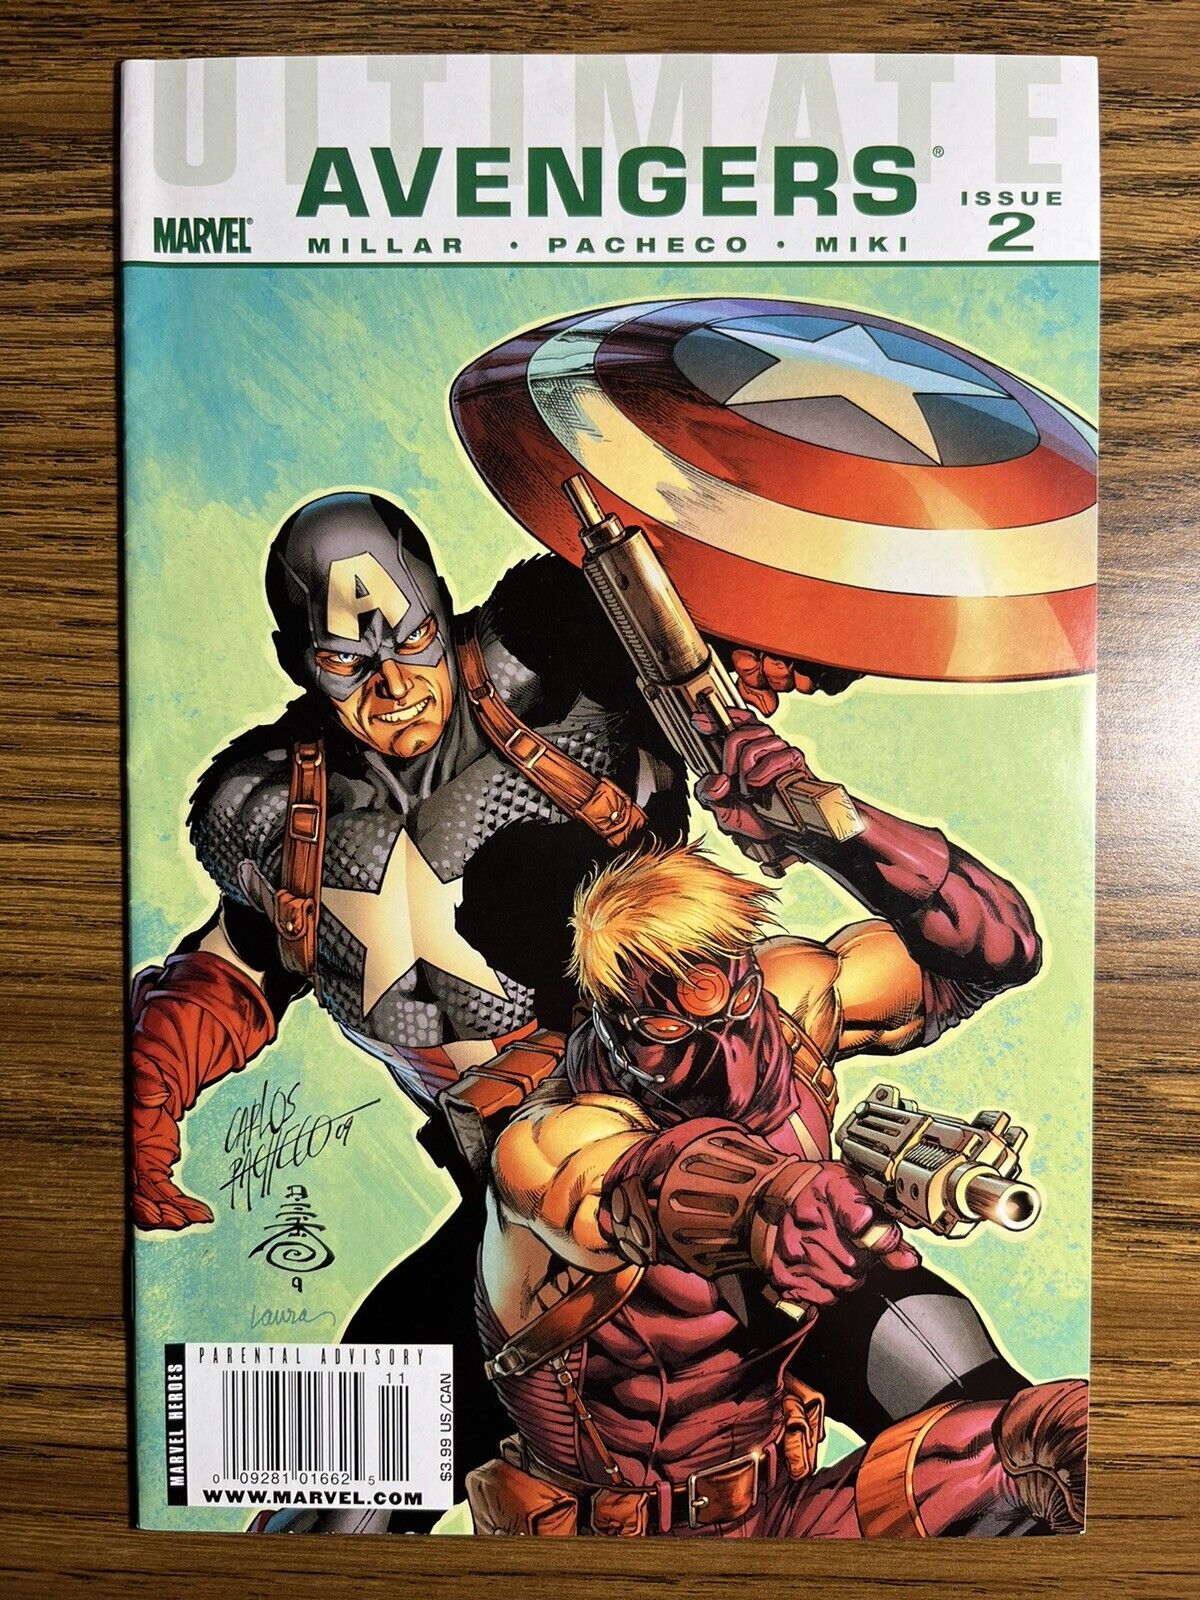 ULTIMATE AVENGERS 2 EXTREMELY RARE NEWSSTAND VARIANT CAPTAIN AMERICA MARVEL 2009